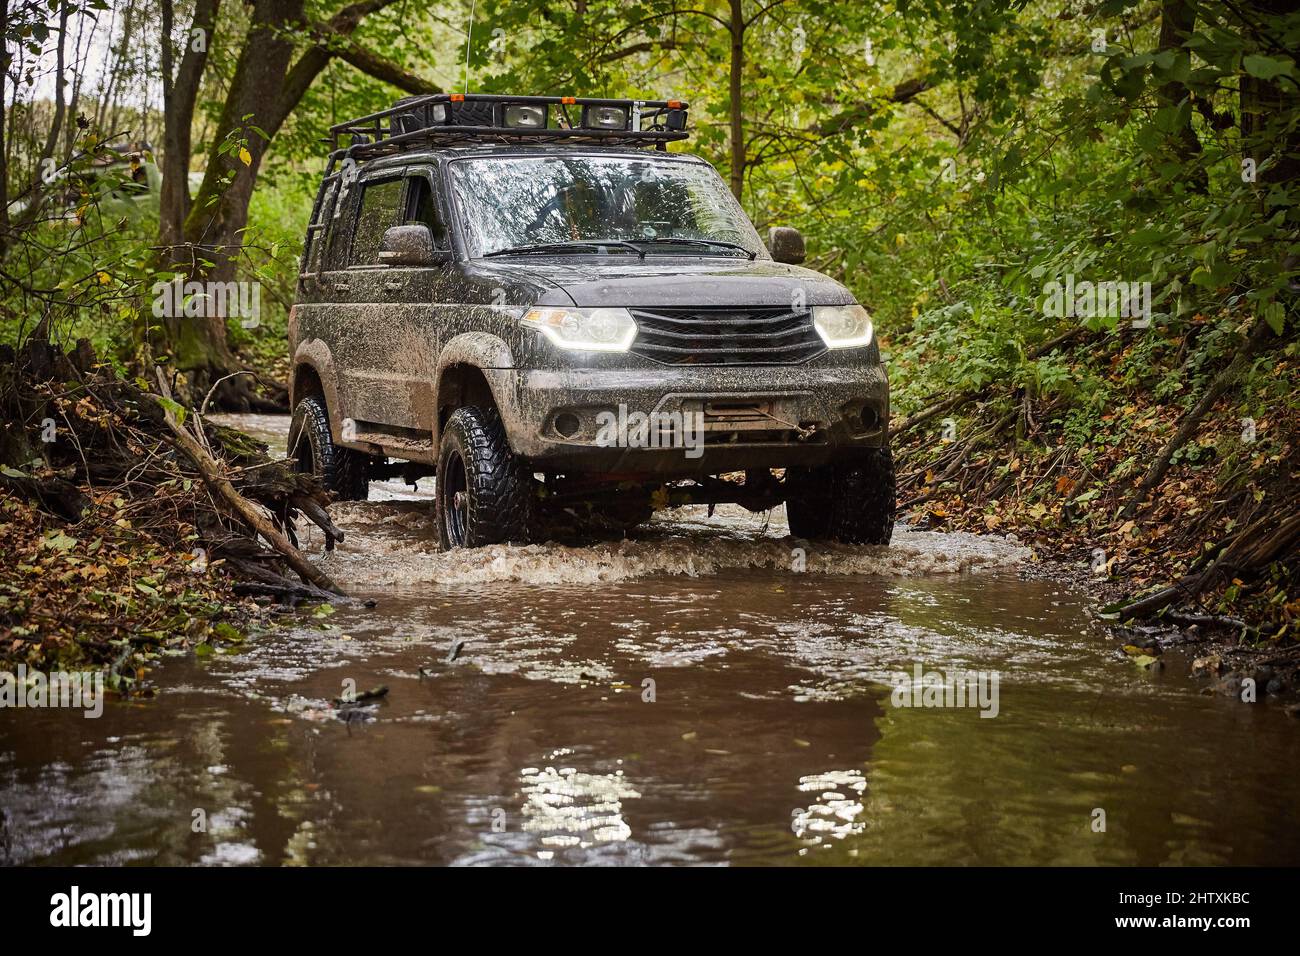 Moscow region, Russia - 28.09.2018. Traveling off-road on a black UAZ Patriot truck. The car is driving along a stream in the forest Stock Photo